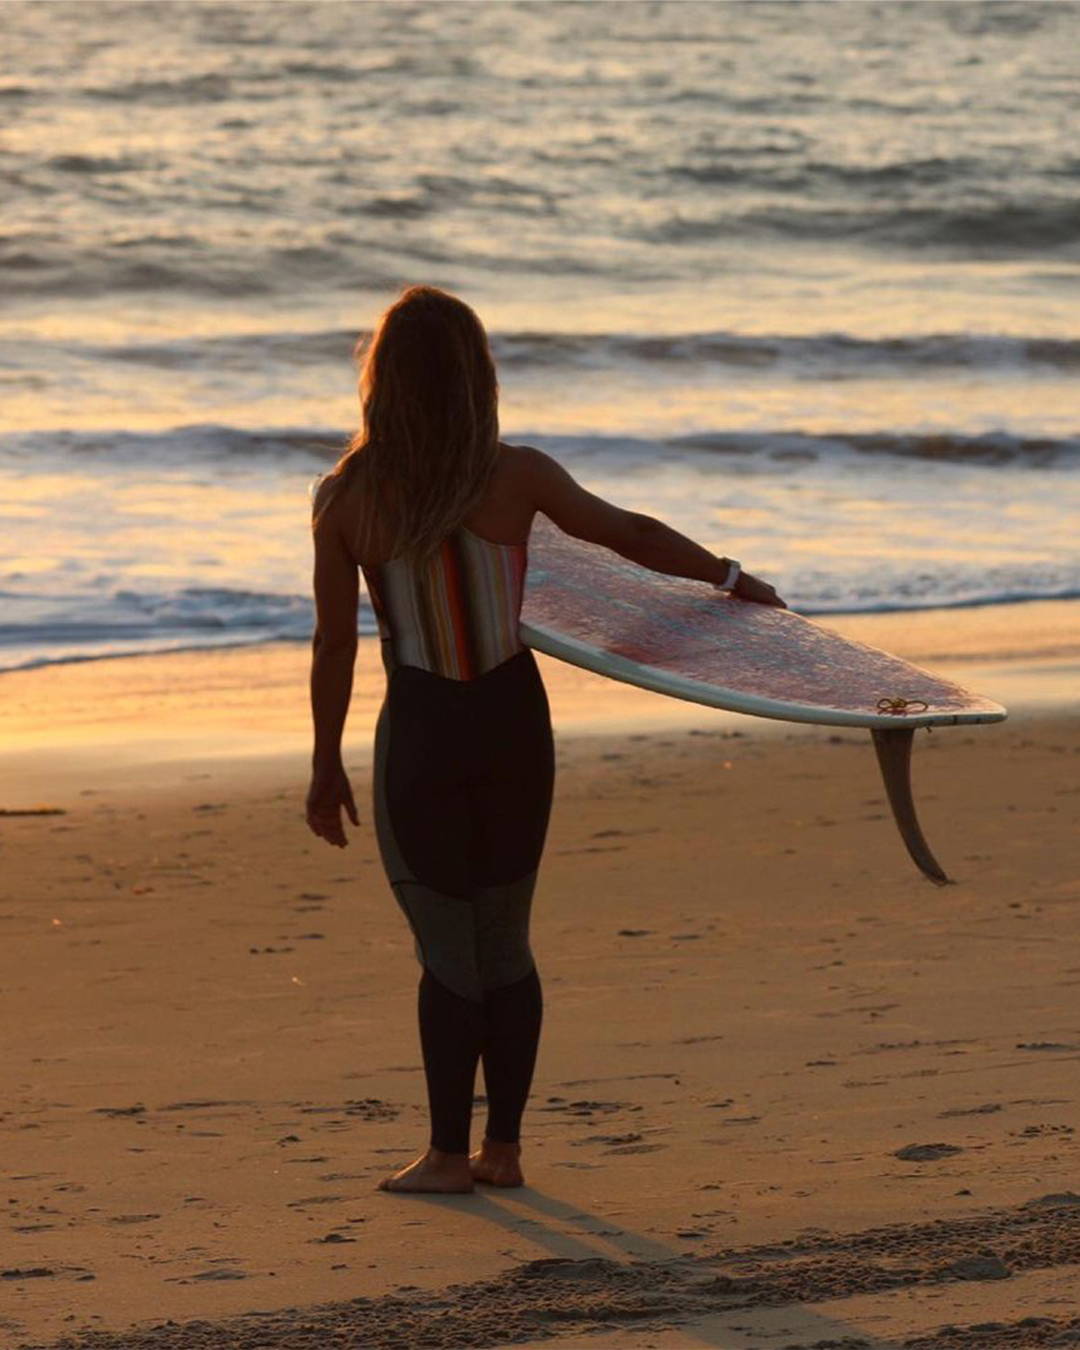  Image of surfer walking towards the Ocean holding a surfboard at sunset.